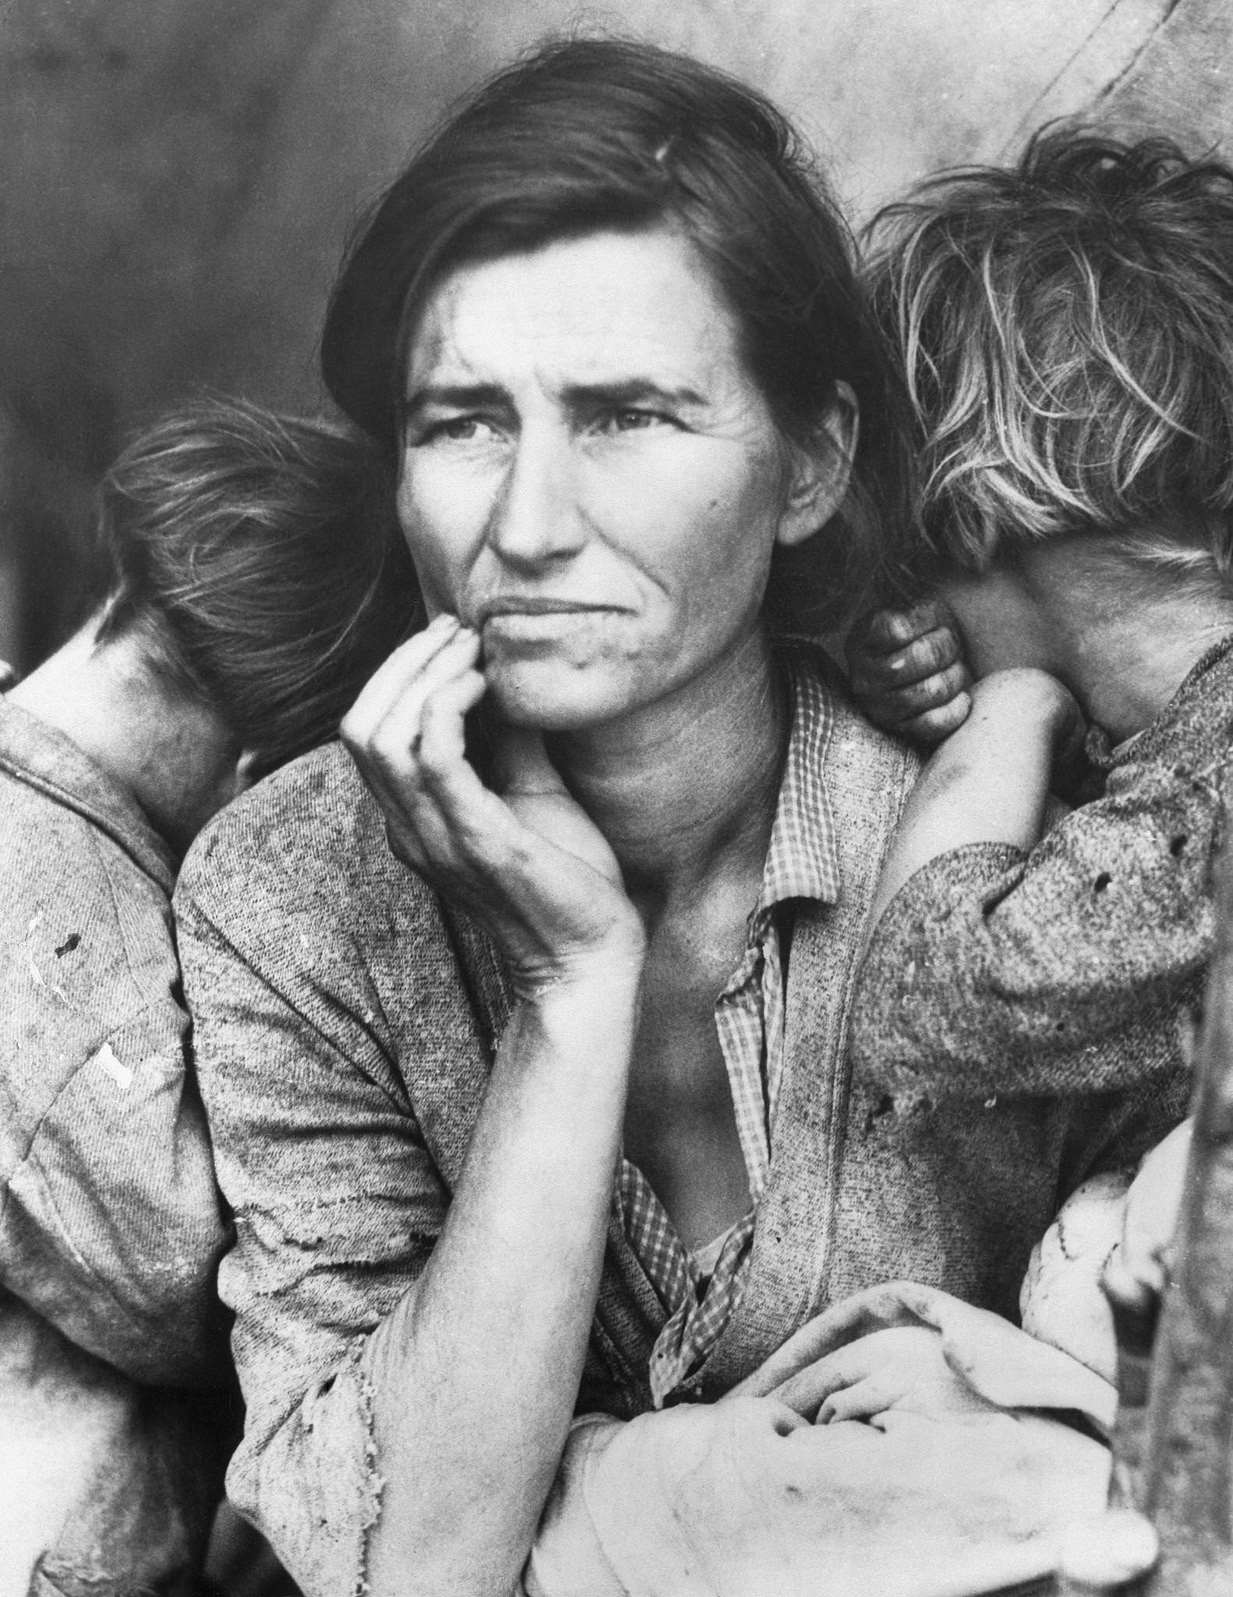 A poverty-stricken migrant mother (Florence Owens Thompson, 32) with three young children gazes off into the distance, 1930s